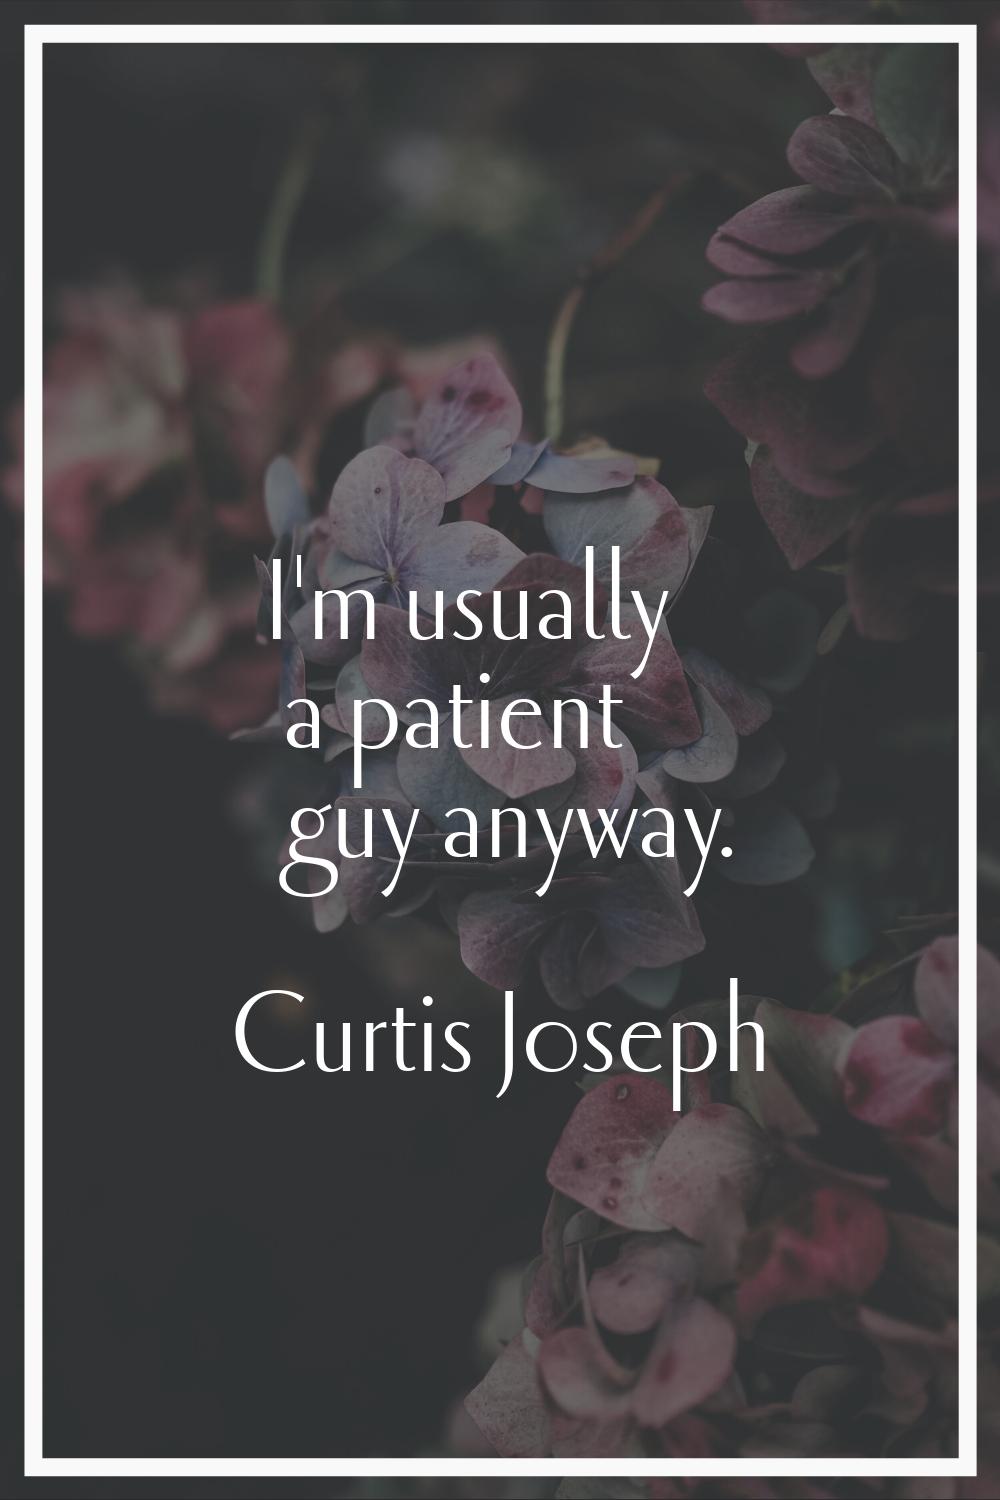 I'm usually a patient guy anyway.